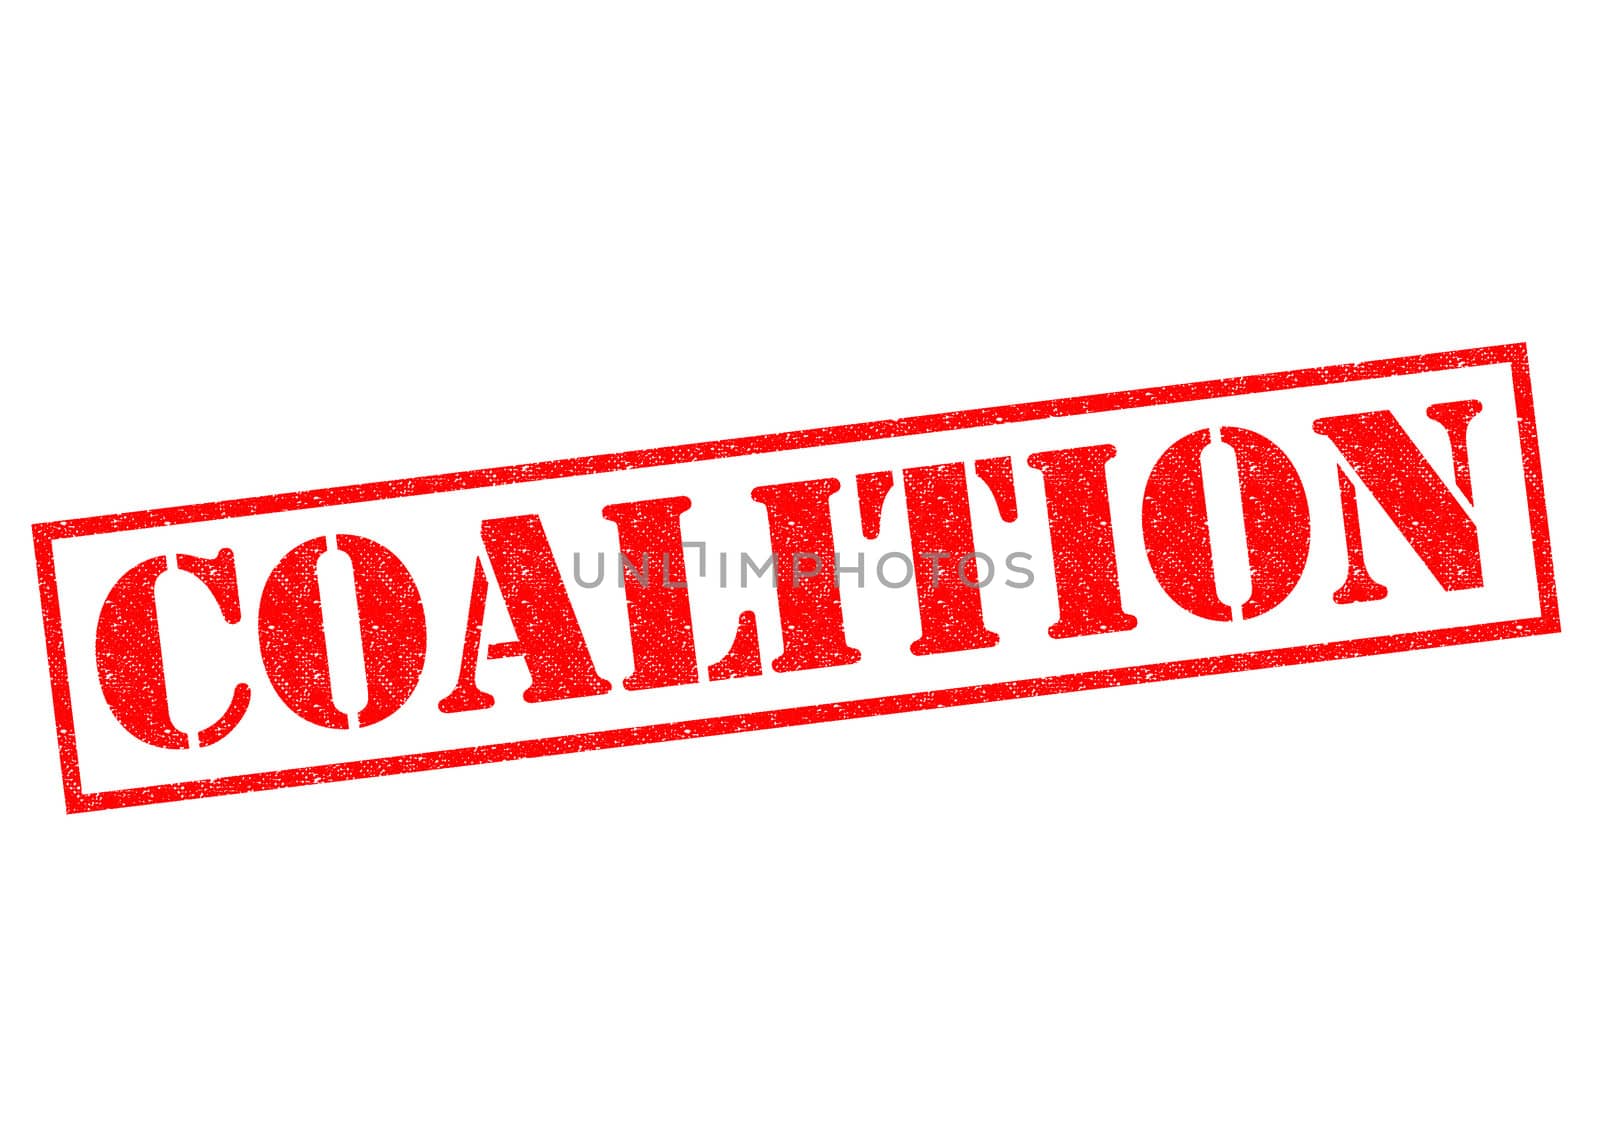 COALITION red Rubber Stamp over a white background.